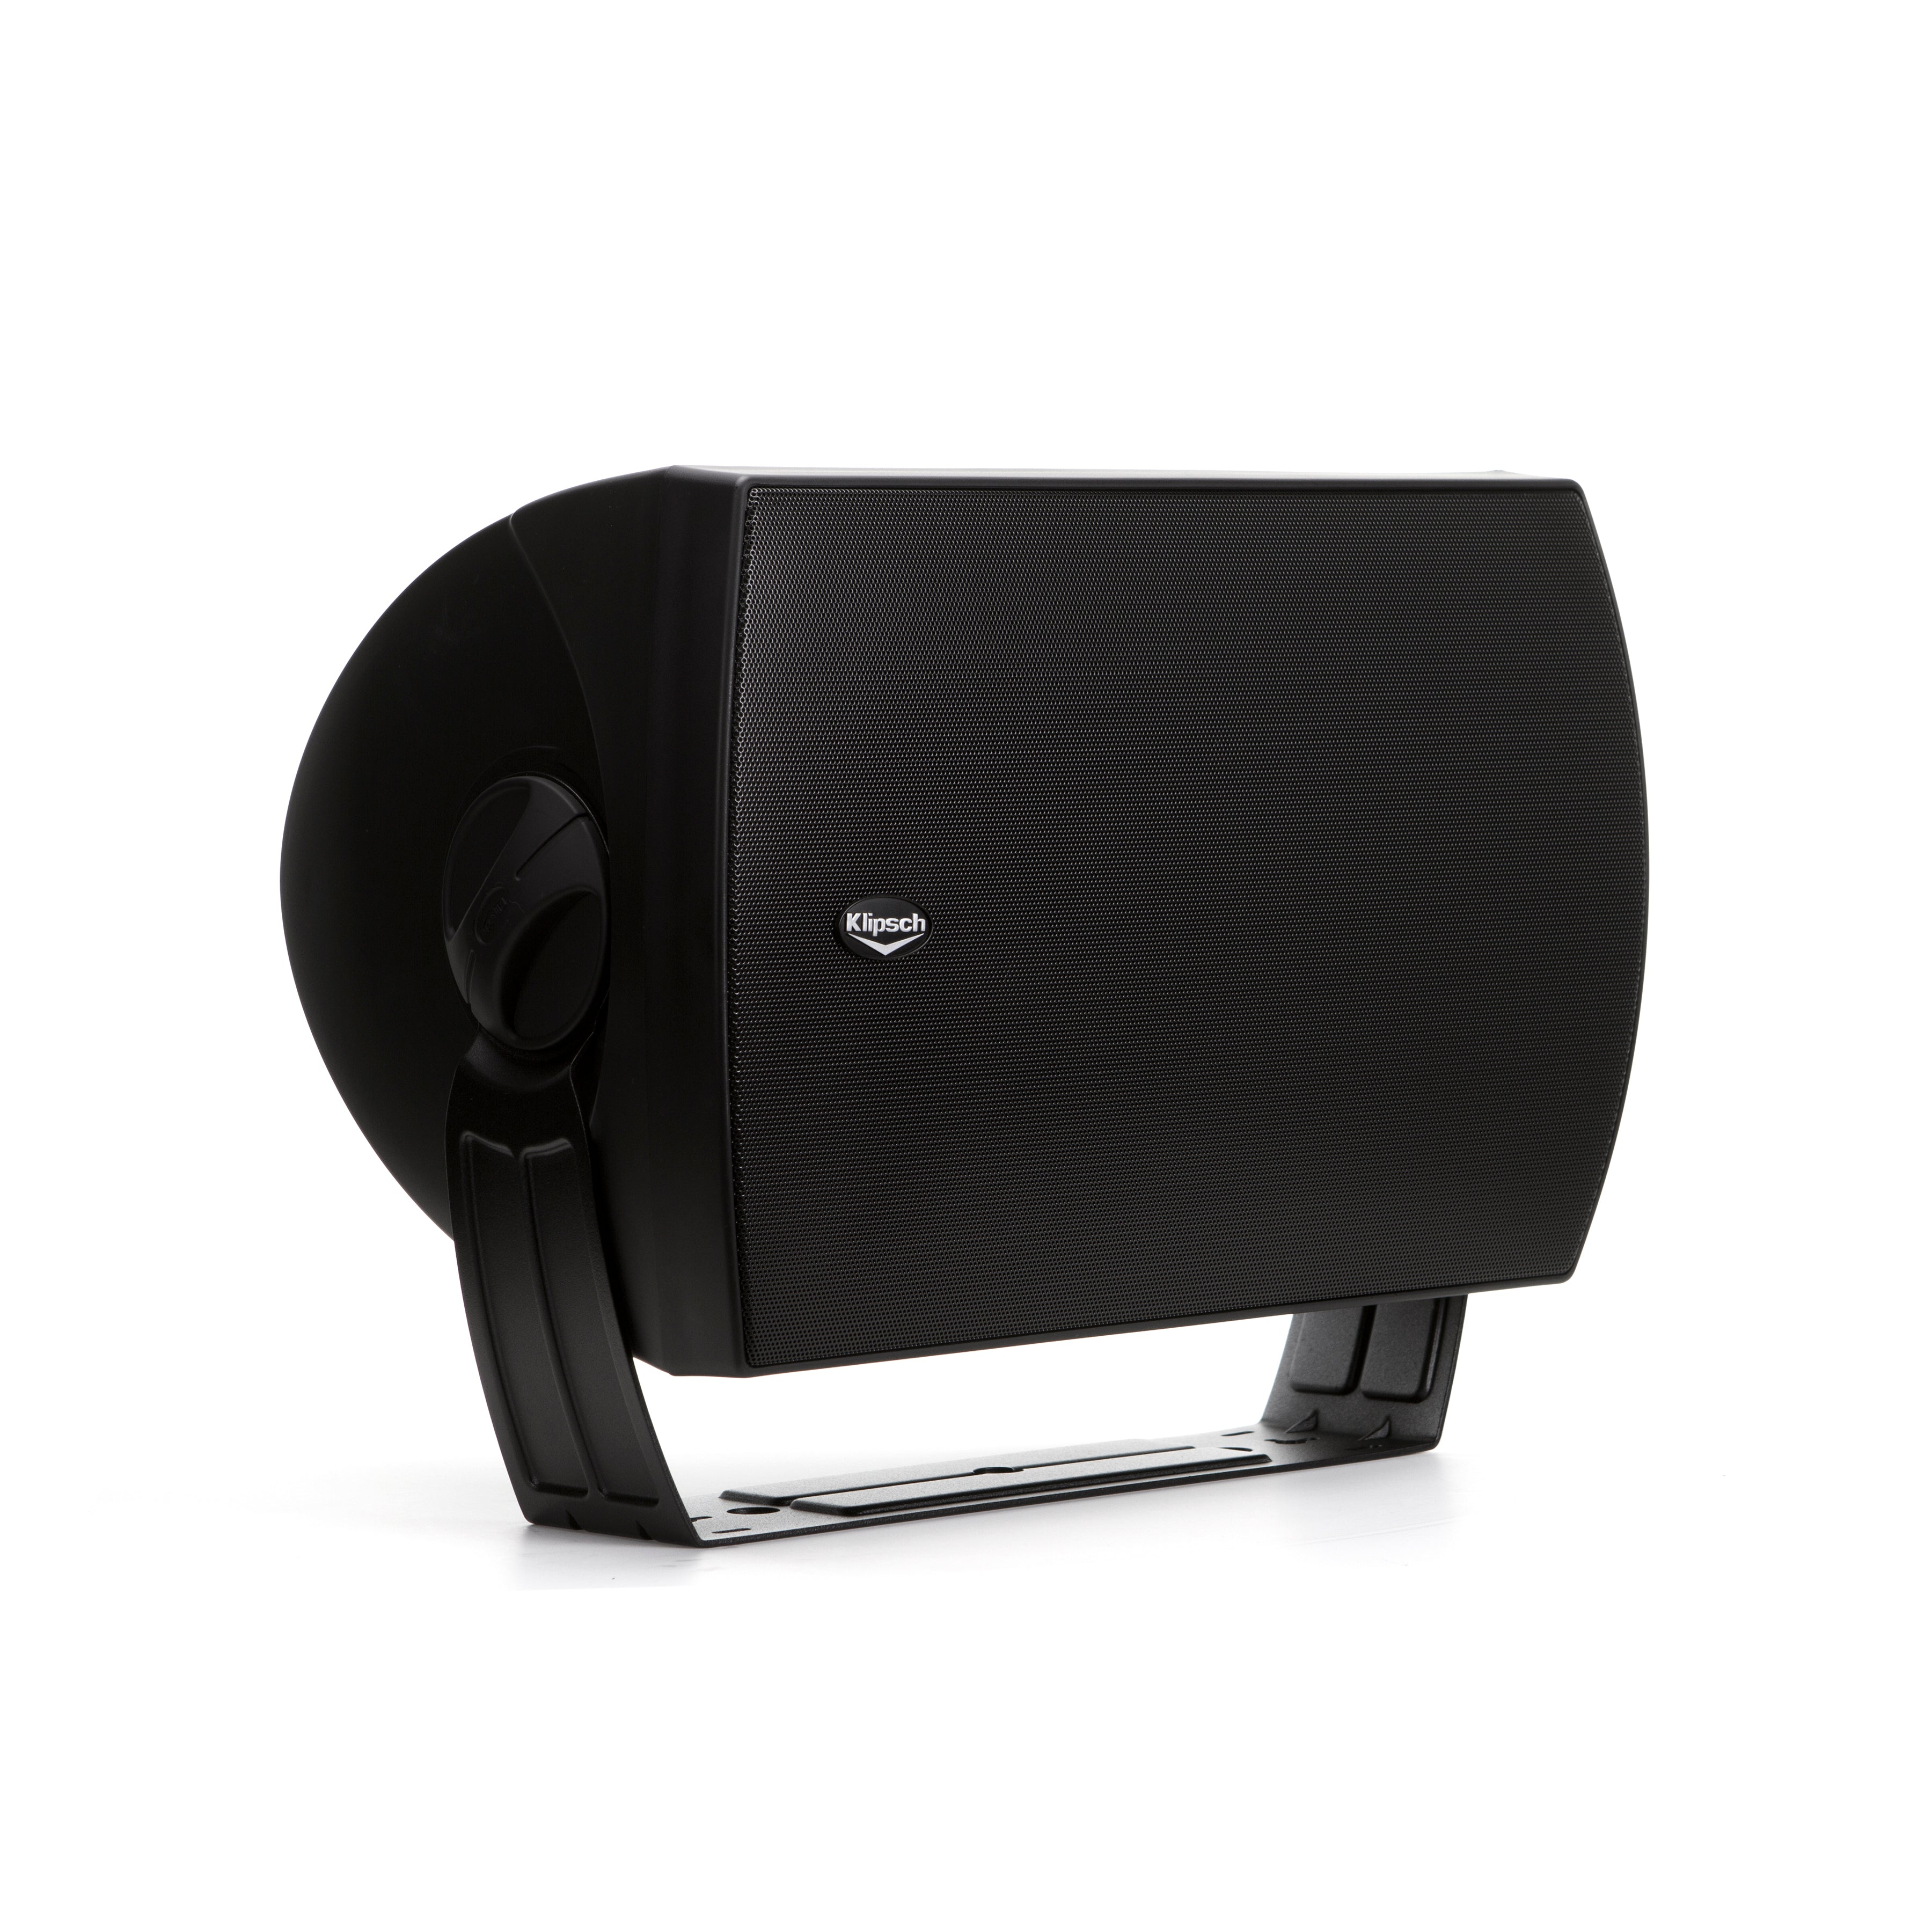 CA-800-TS Outdoor Passive Subwoofer (Single)